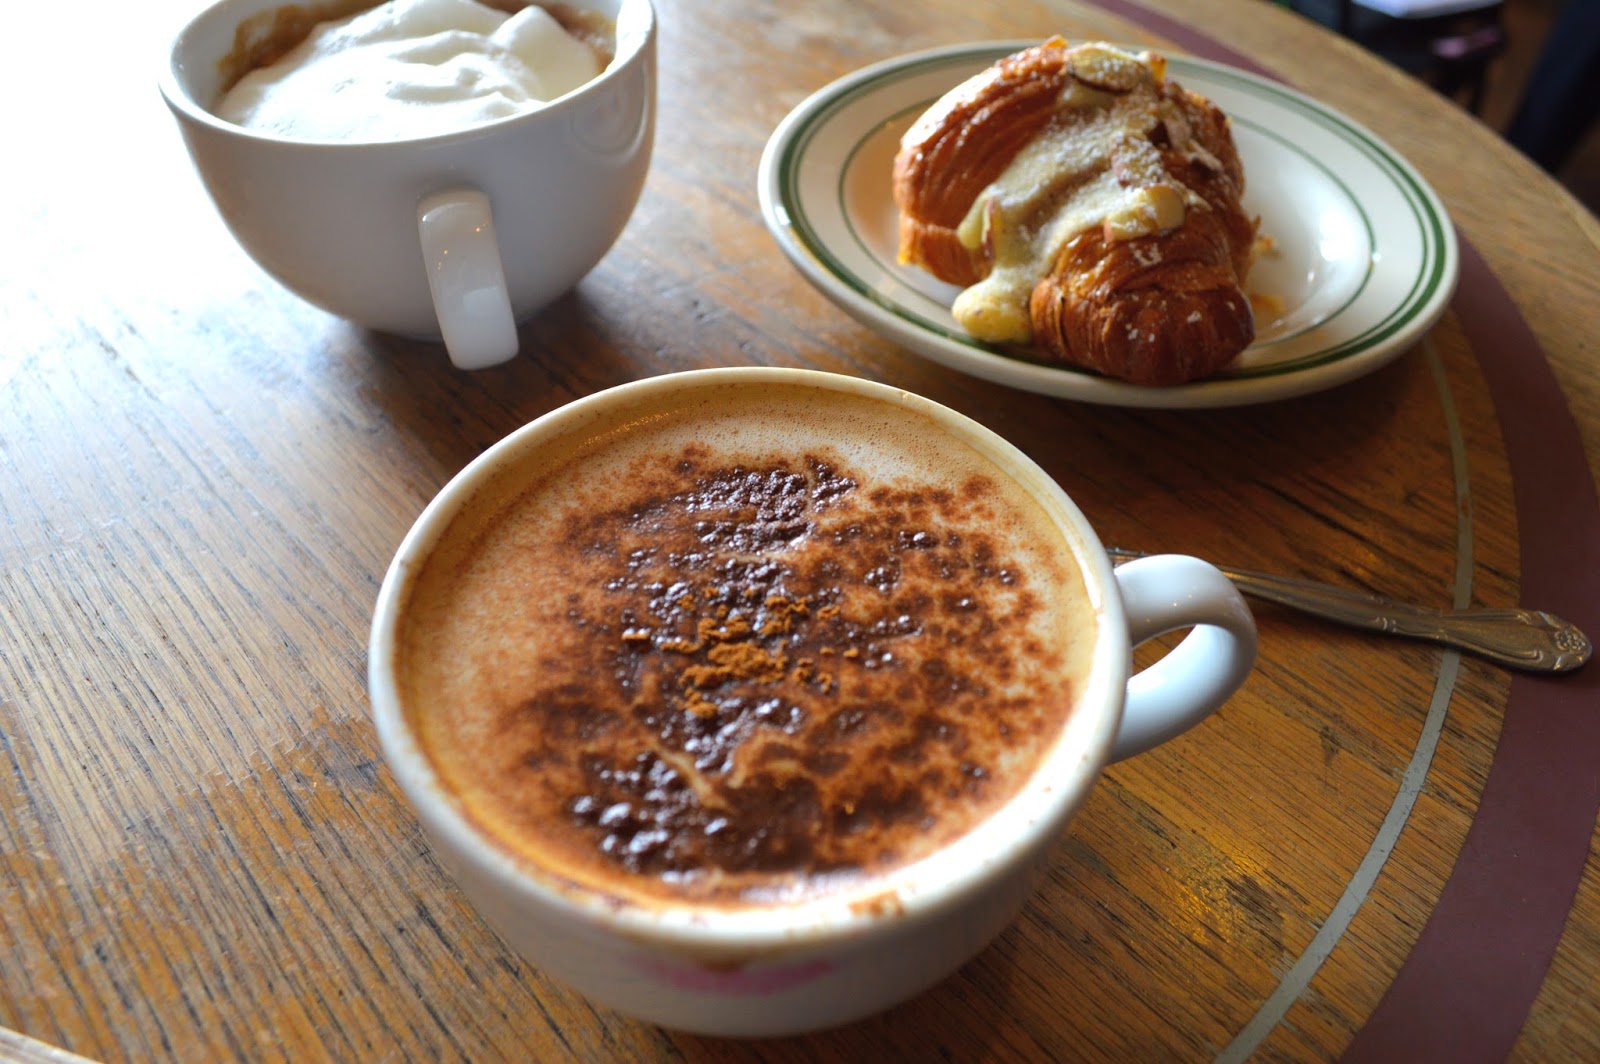 Coffees and pastries from Vashon Island Coffee Roasterie